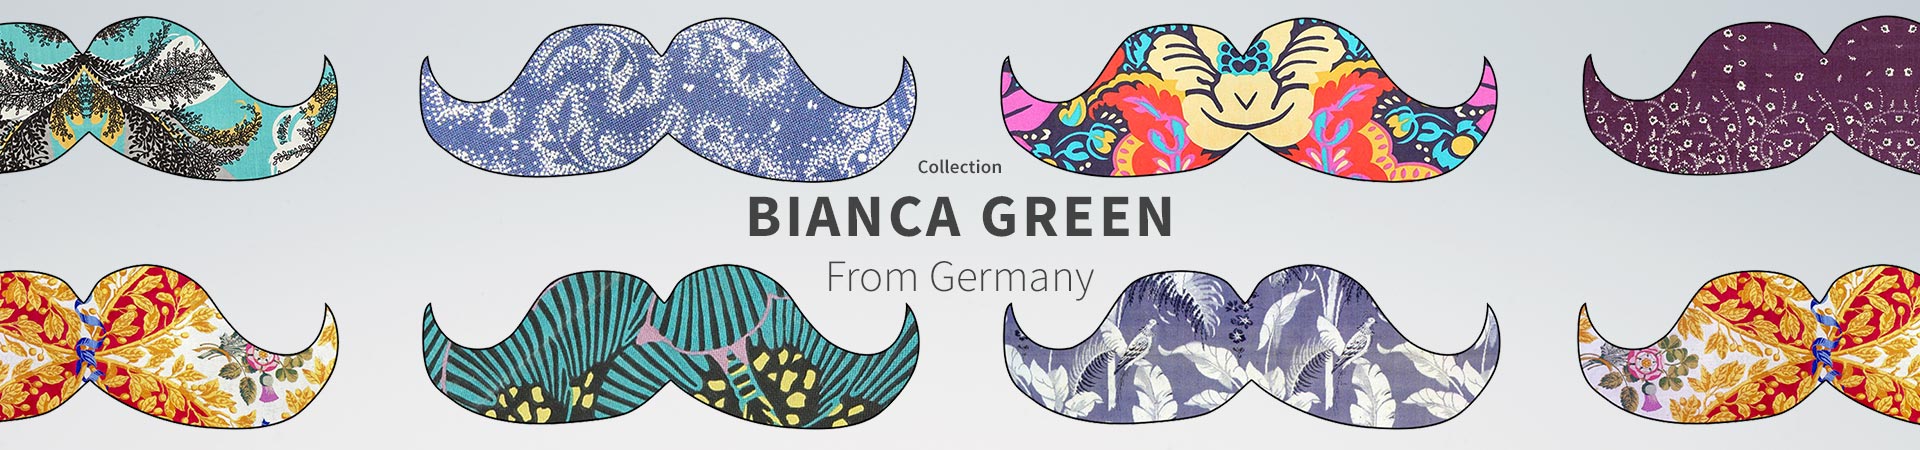 Collection Bianca Green